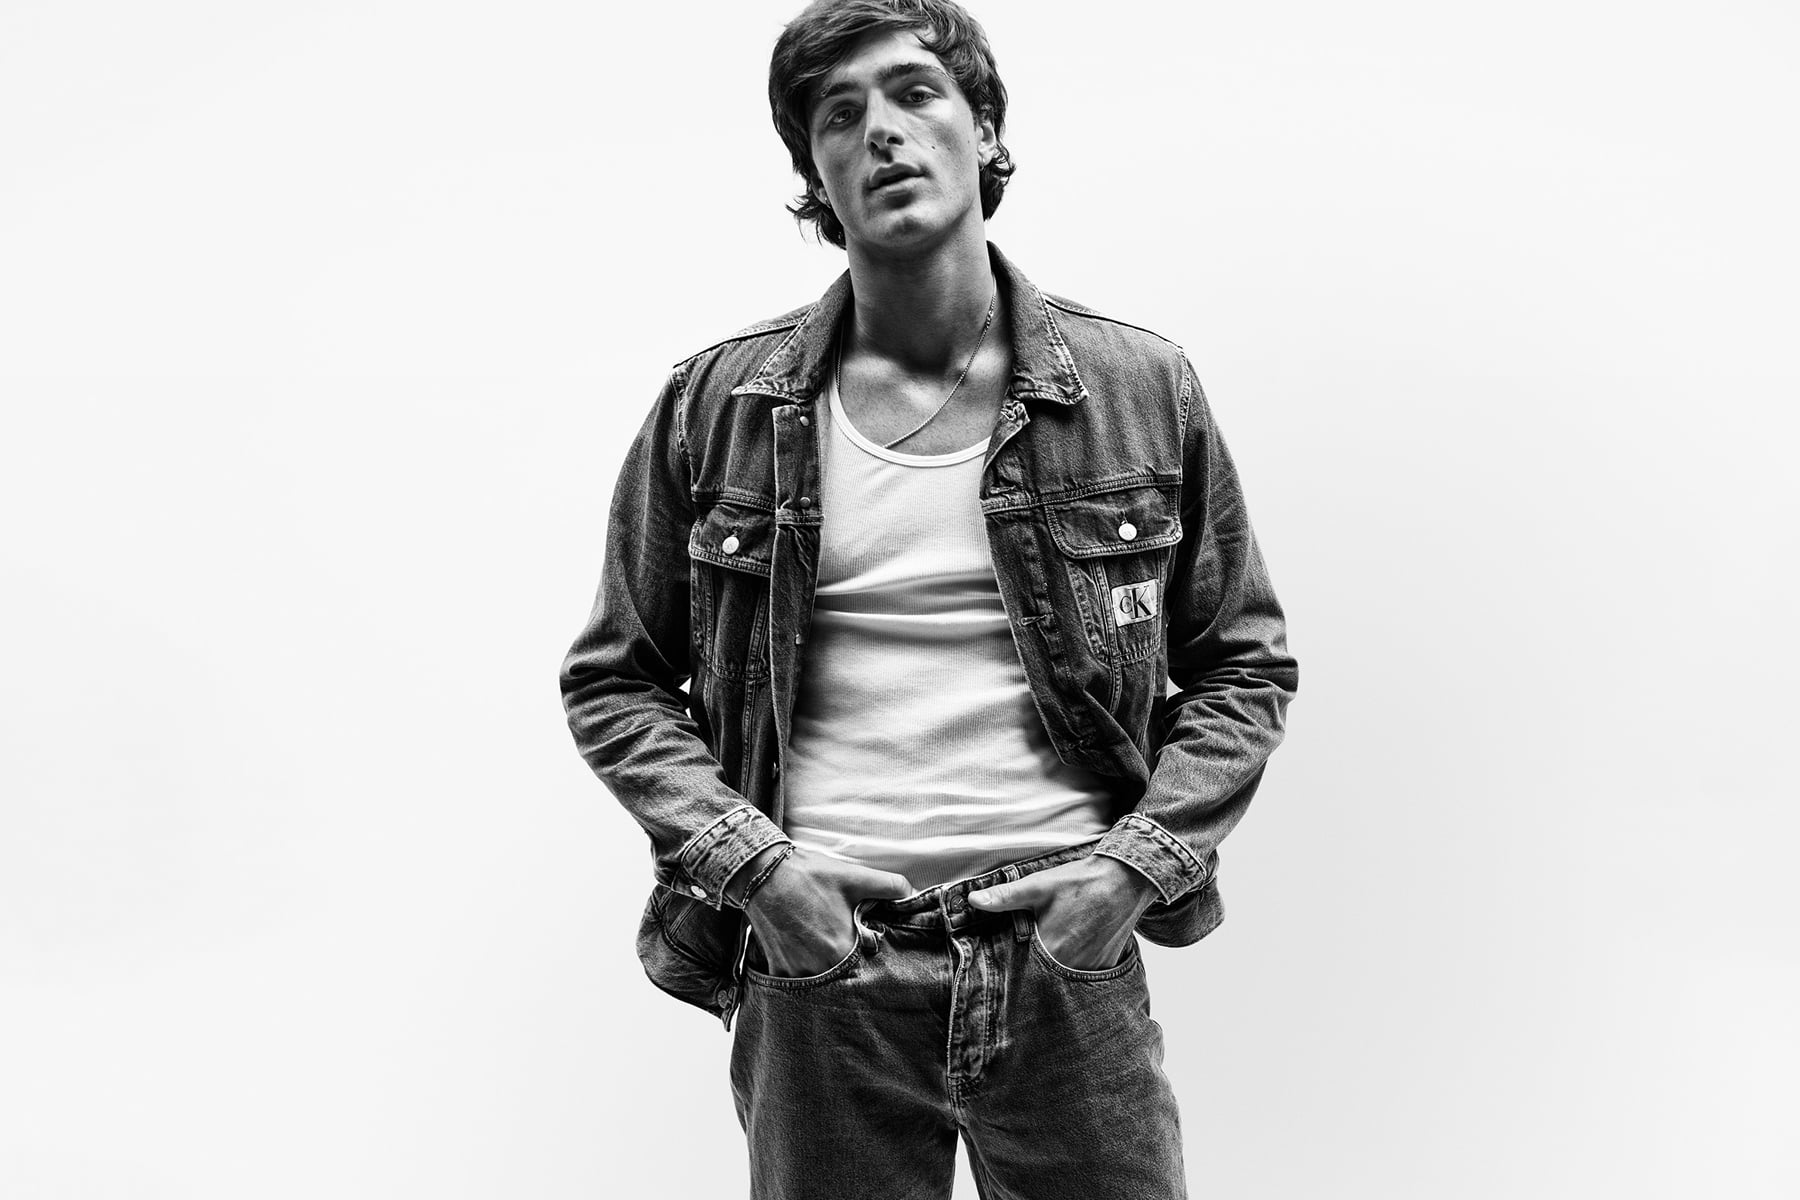 Actor Jacob Elordi For Calvin Klein Spring 2021 | Jacob Elordi and Megan  Thee Stallion Join Today's Leaders For Calvin Klein's New Campaign |  POPSUGAR Fashion Photo 5